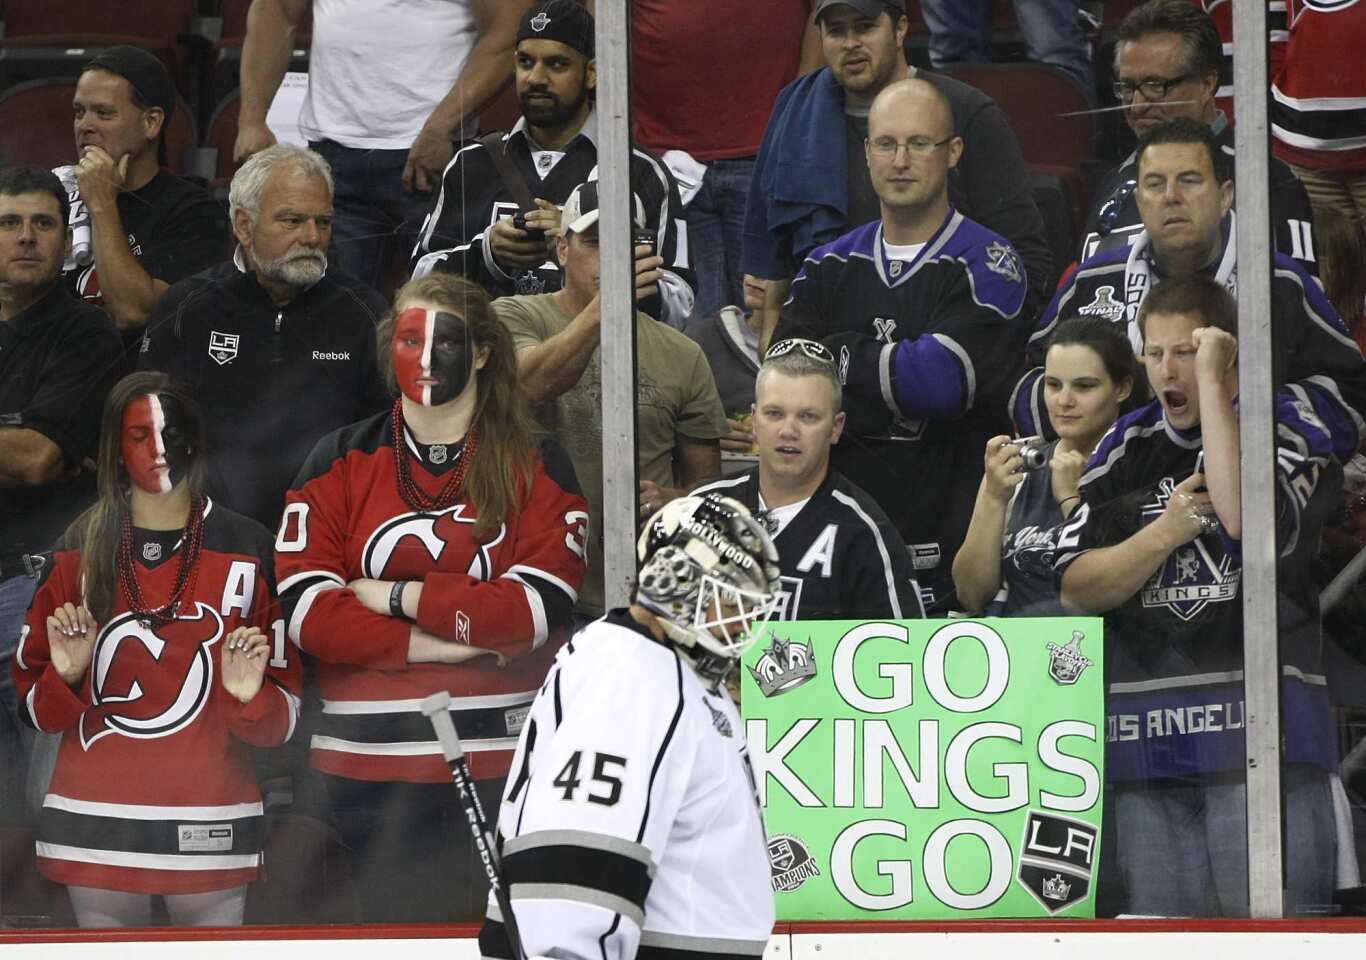 A group of Kings fans show their support as Kings backup goalie Jonathan Bernier warms up before the start of Game 1 of the Stanley Cup Final in Newark, N.J., on Wednesday.